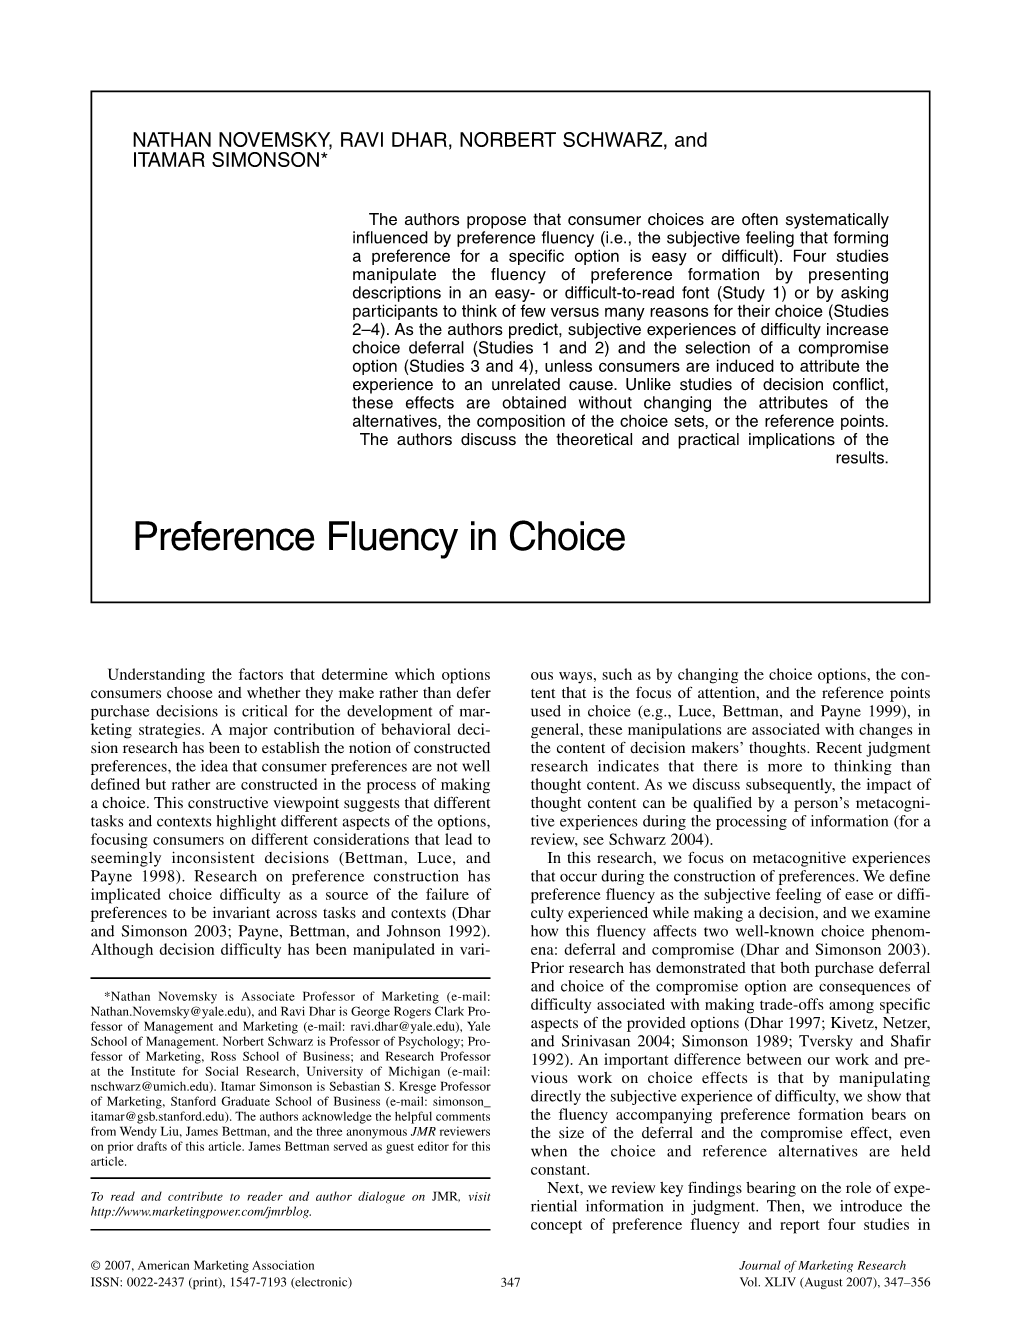 Preference Fluency in Choice